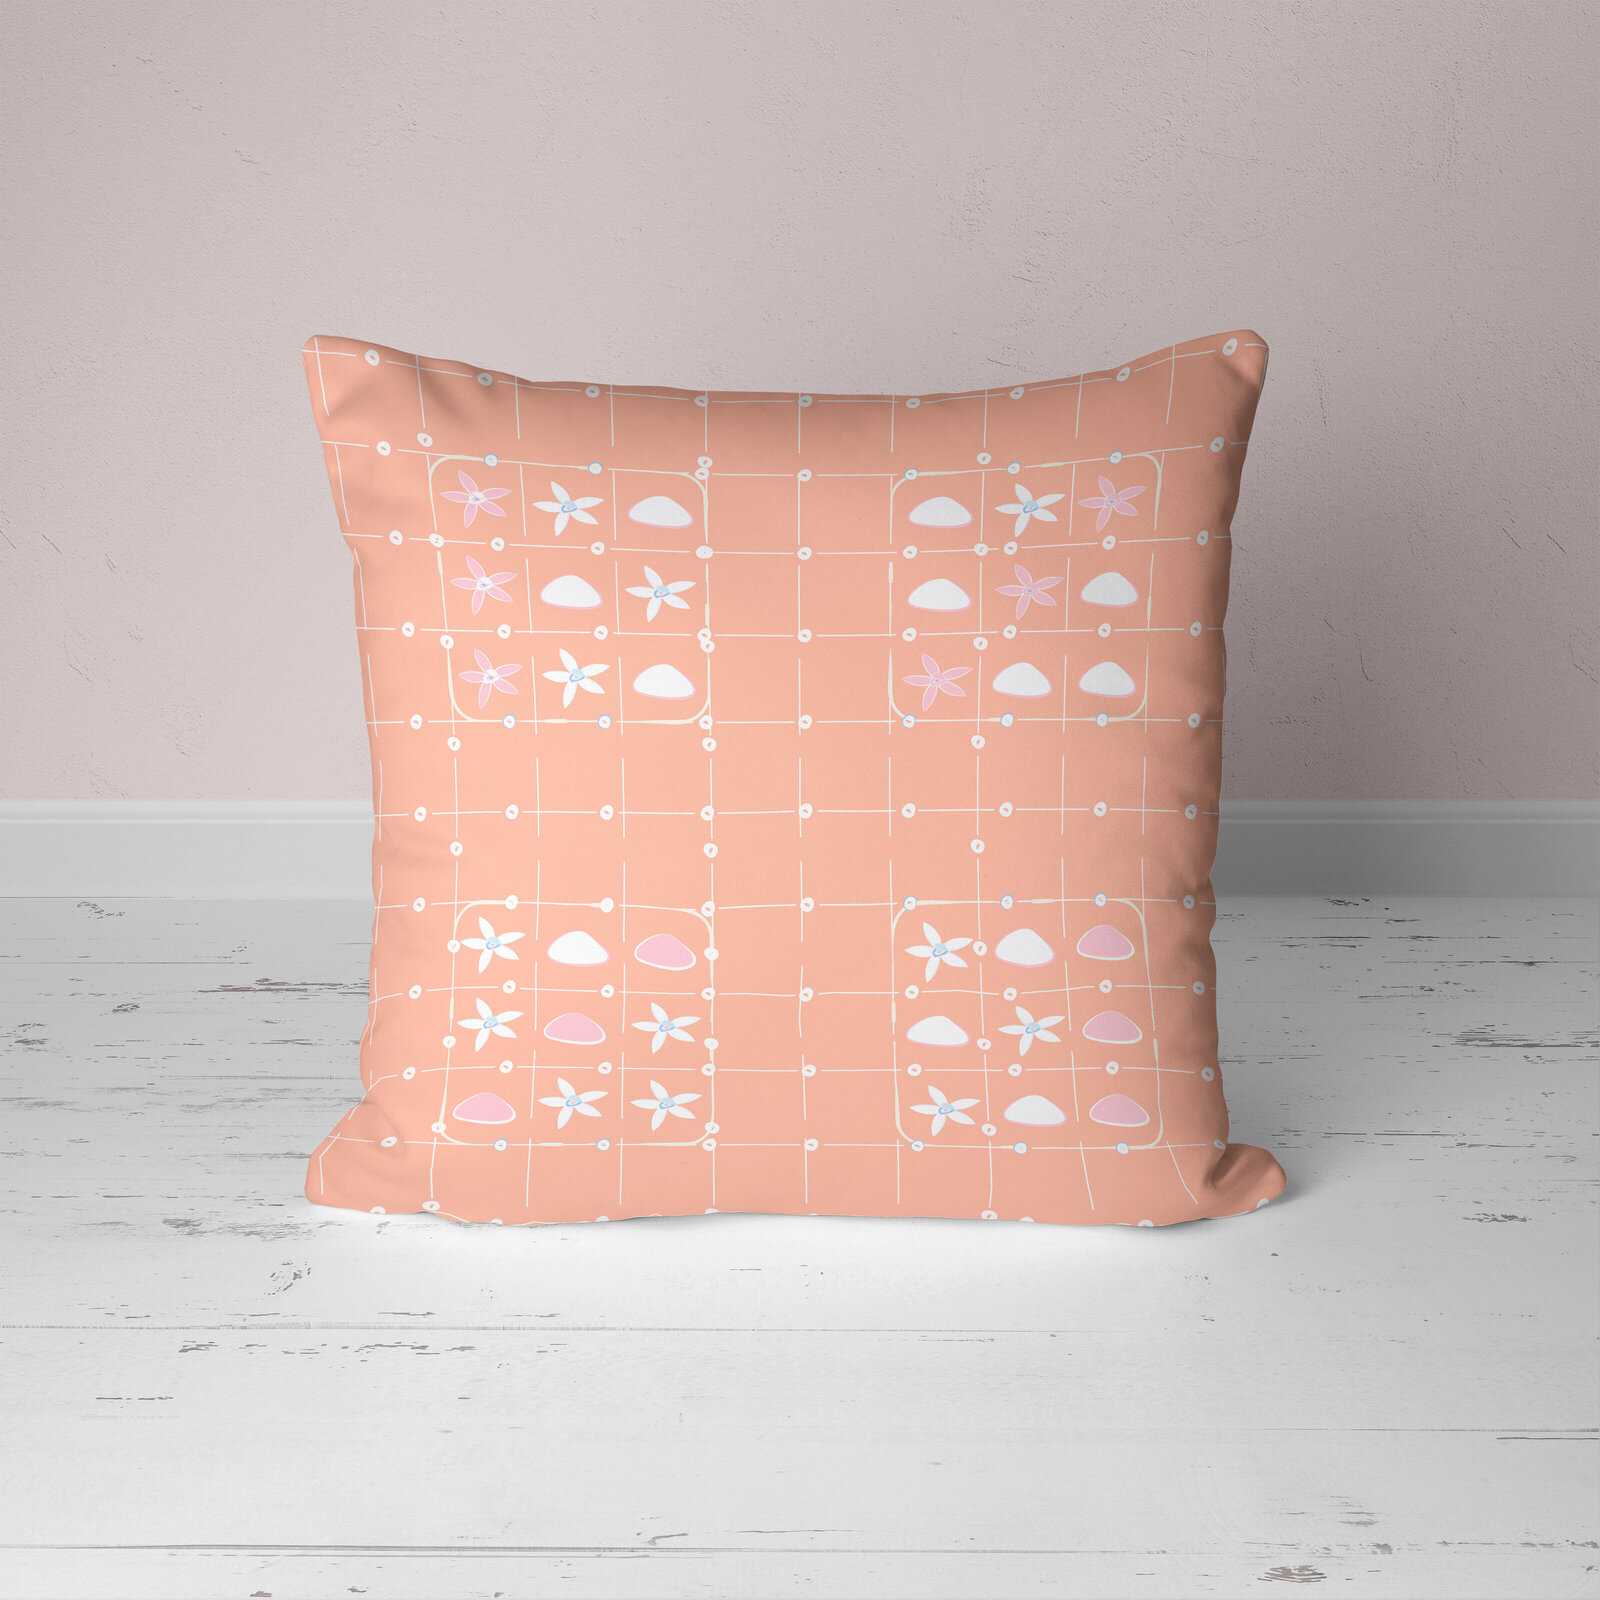 Coral and white patterned pillow